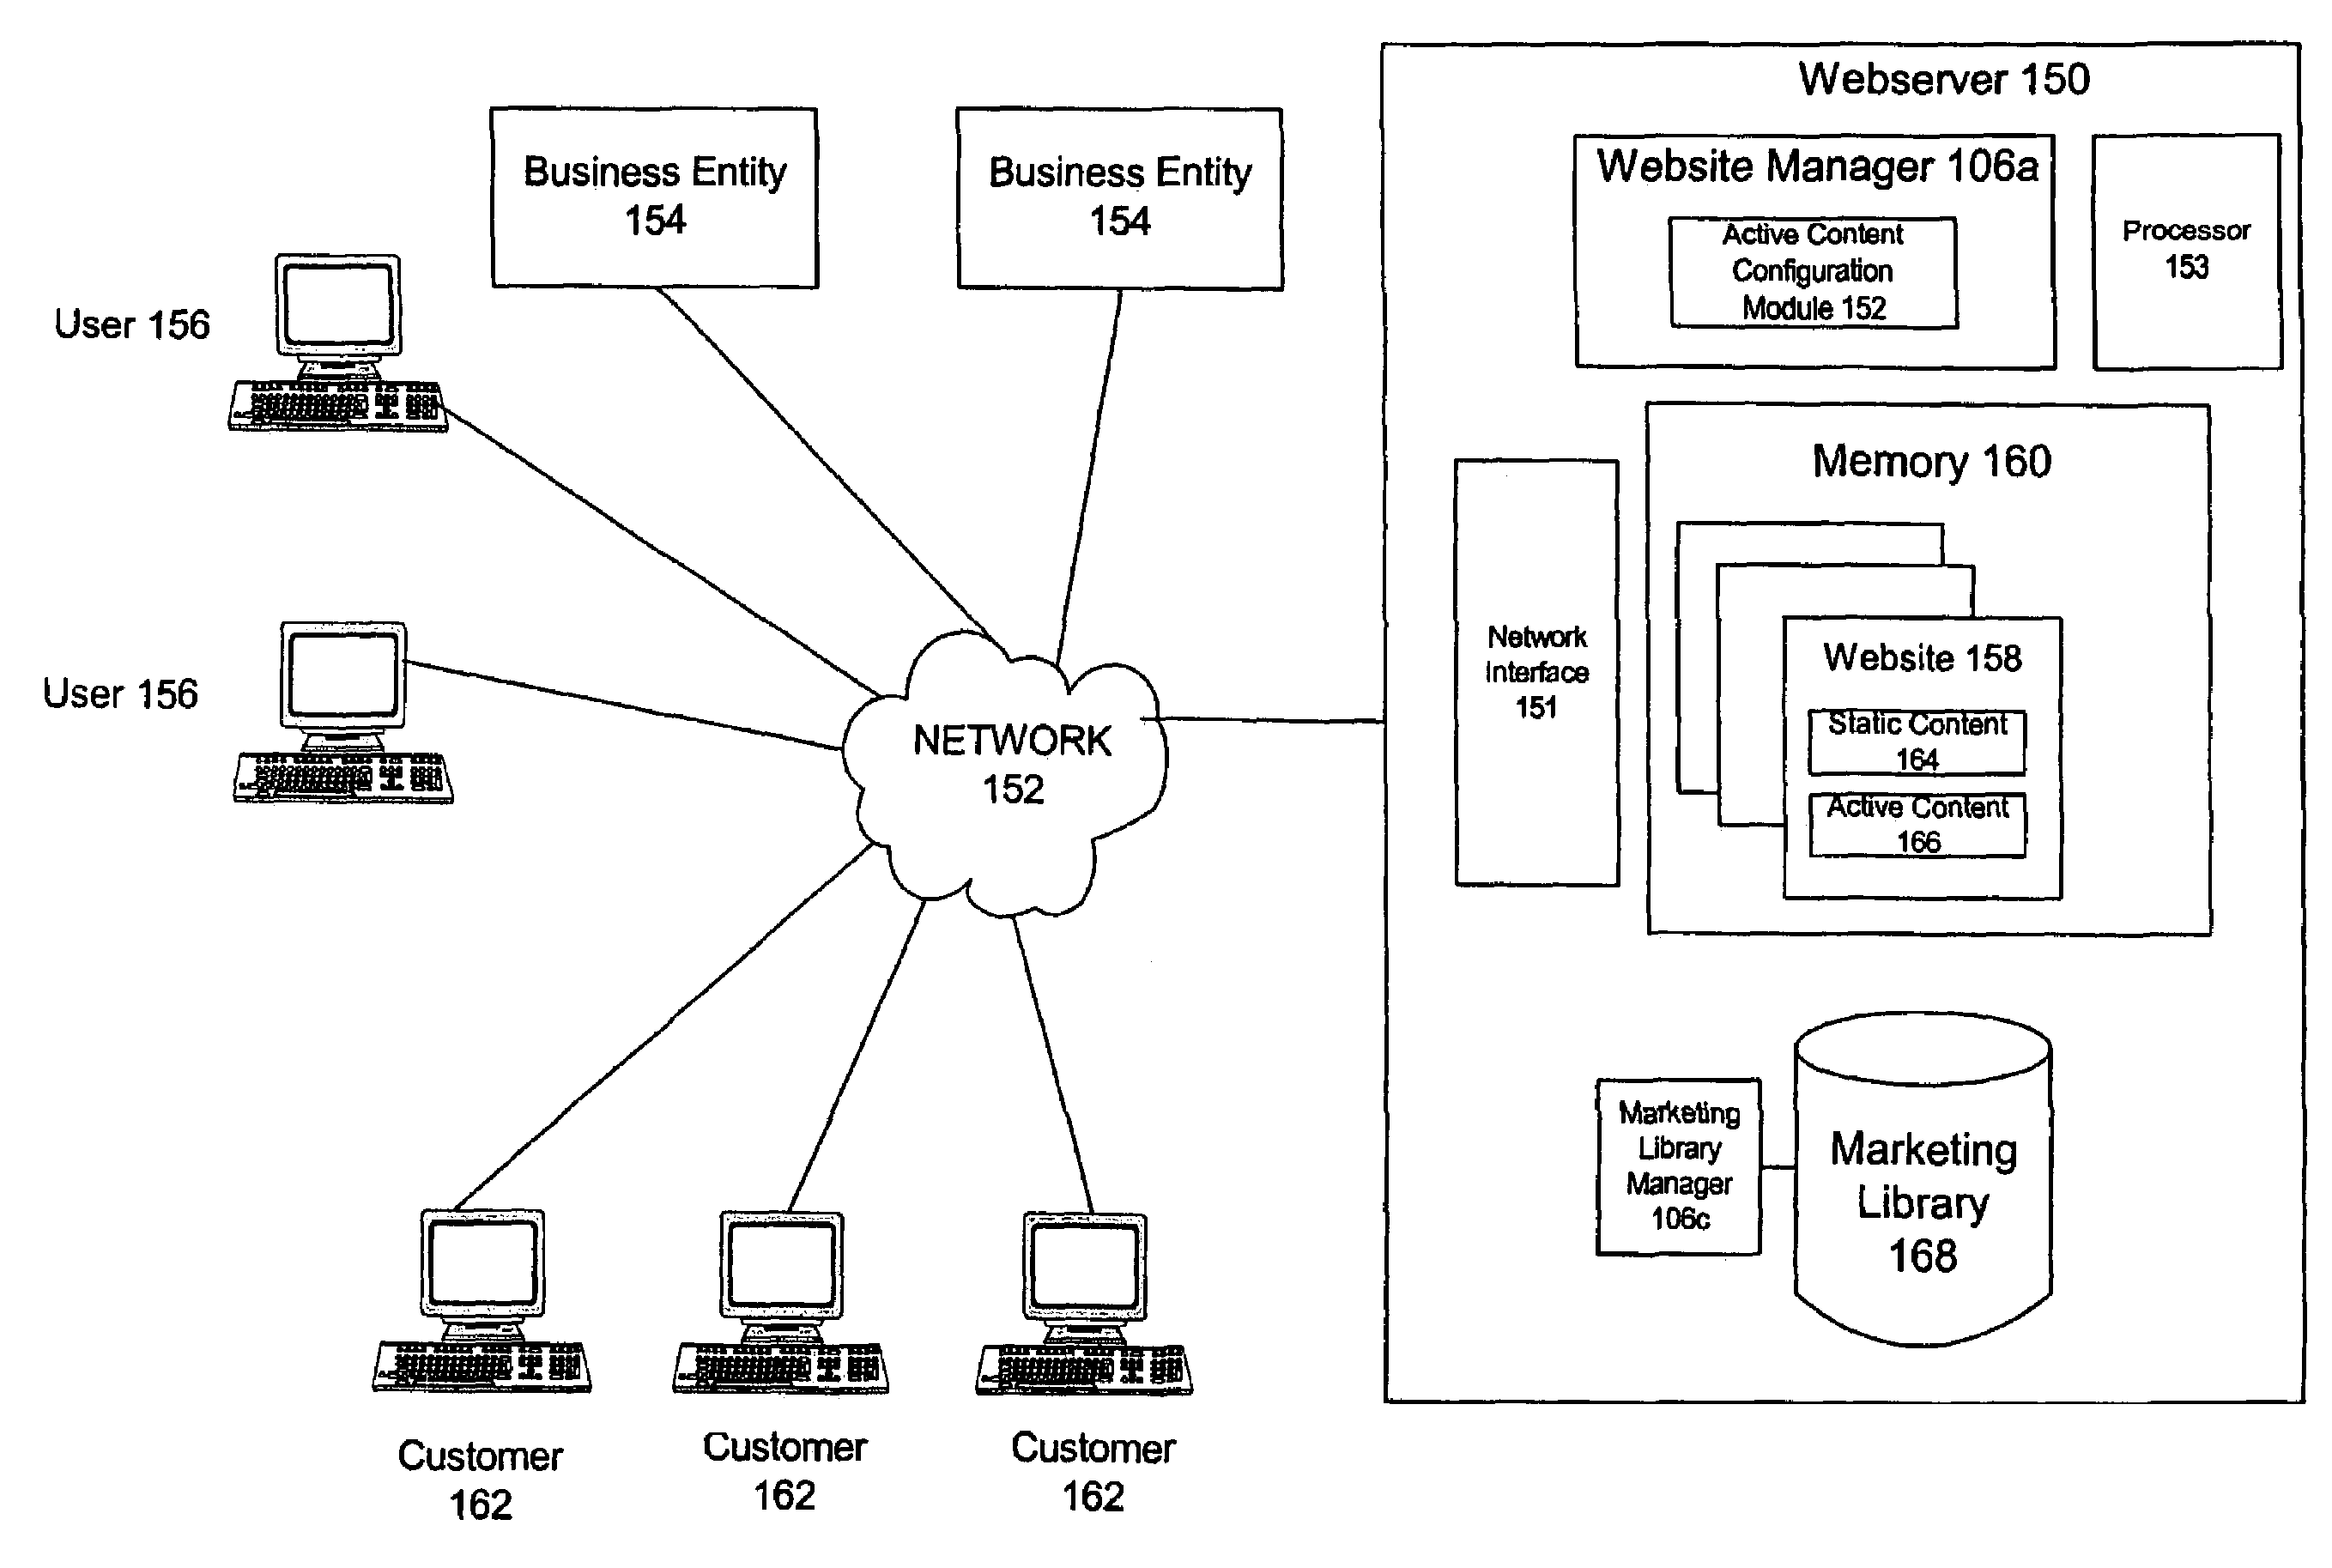 Business platform with networked, association-based business entity access management and active content website configuration